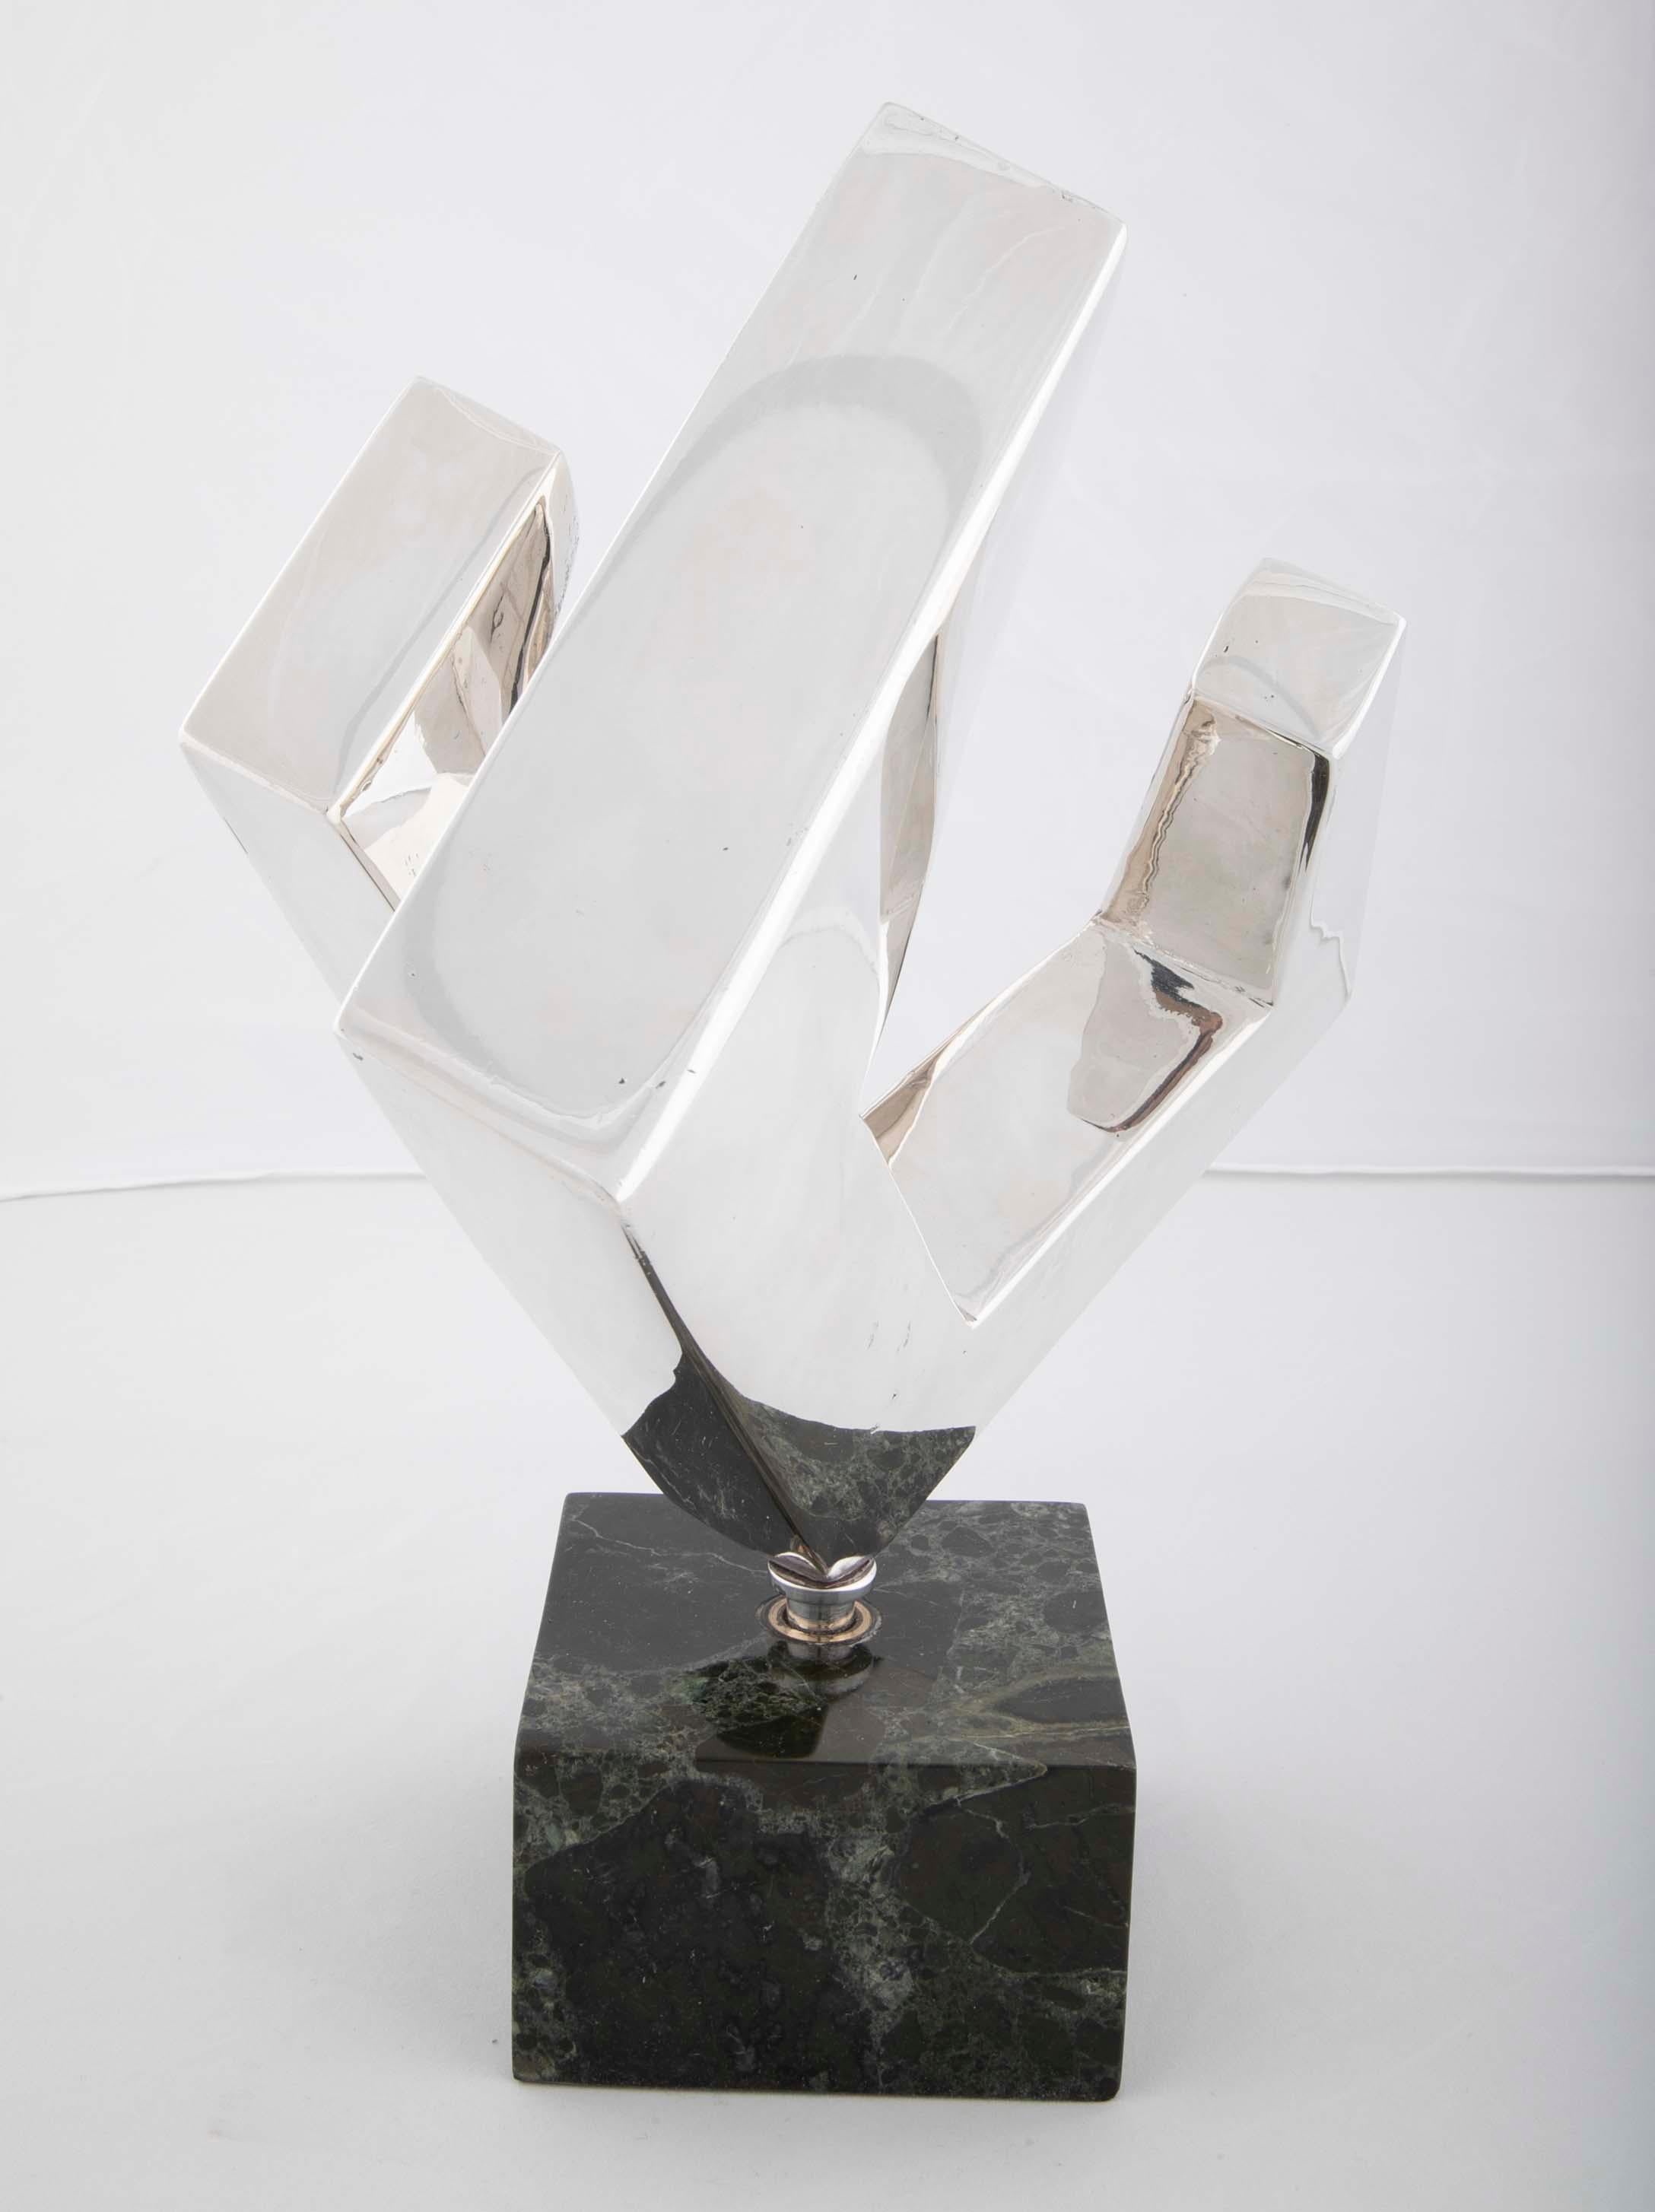 A silver plated abstract sculpture by Lucile Driskell (1924-2017) signed and numbered 1/100.